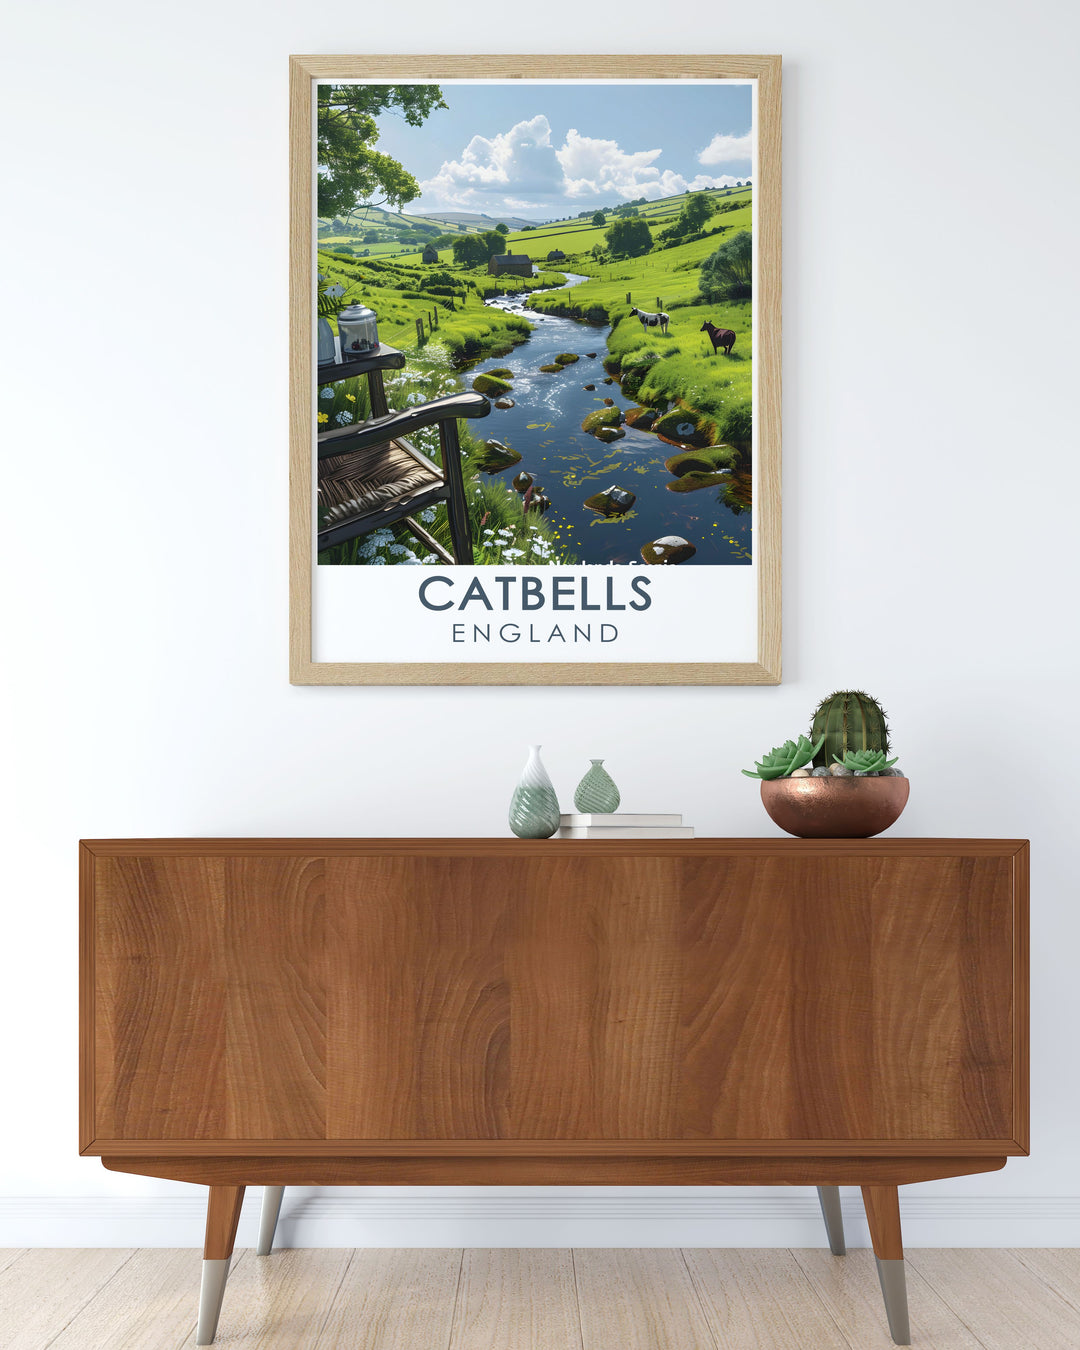 Beautiful Catbells Summit travel poster that highlights the natural charm of the Lake District including Newlands Valley an excellent choice for those looking to bring tranquility and adventure into their living spaces